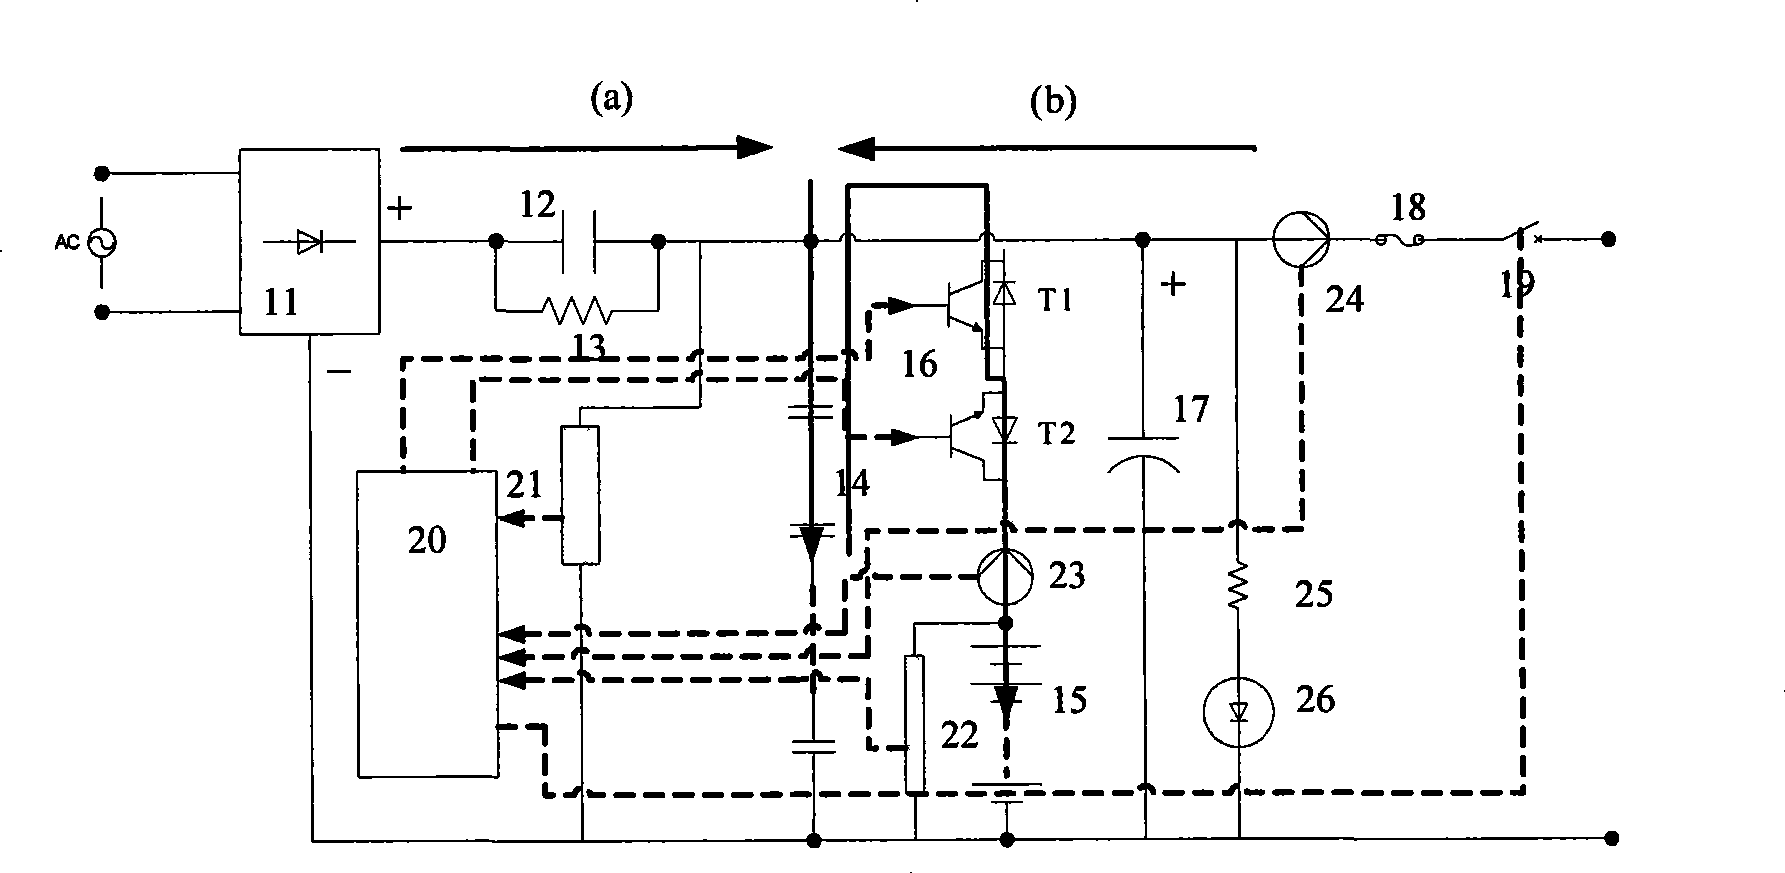 Mixed battery pack comprising lithium power cell and super capacitor